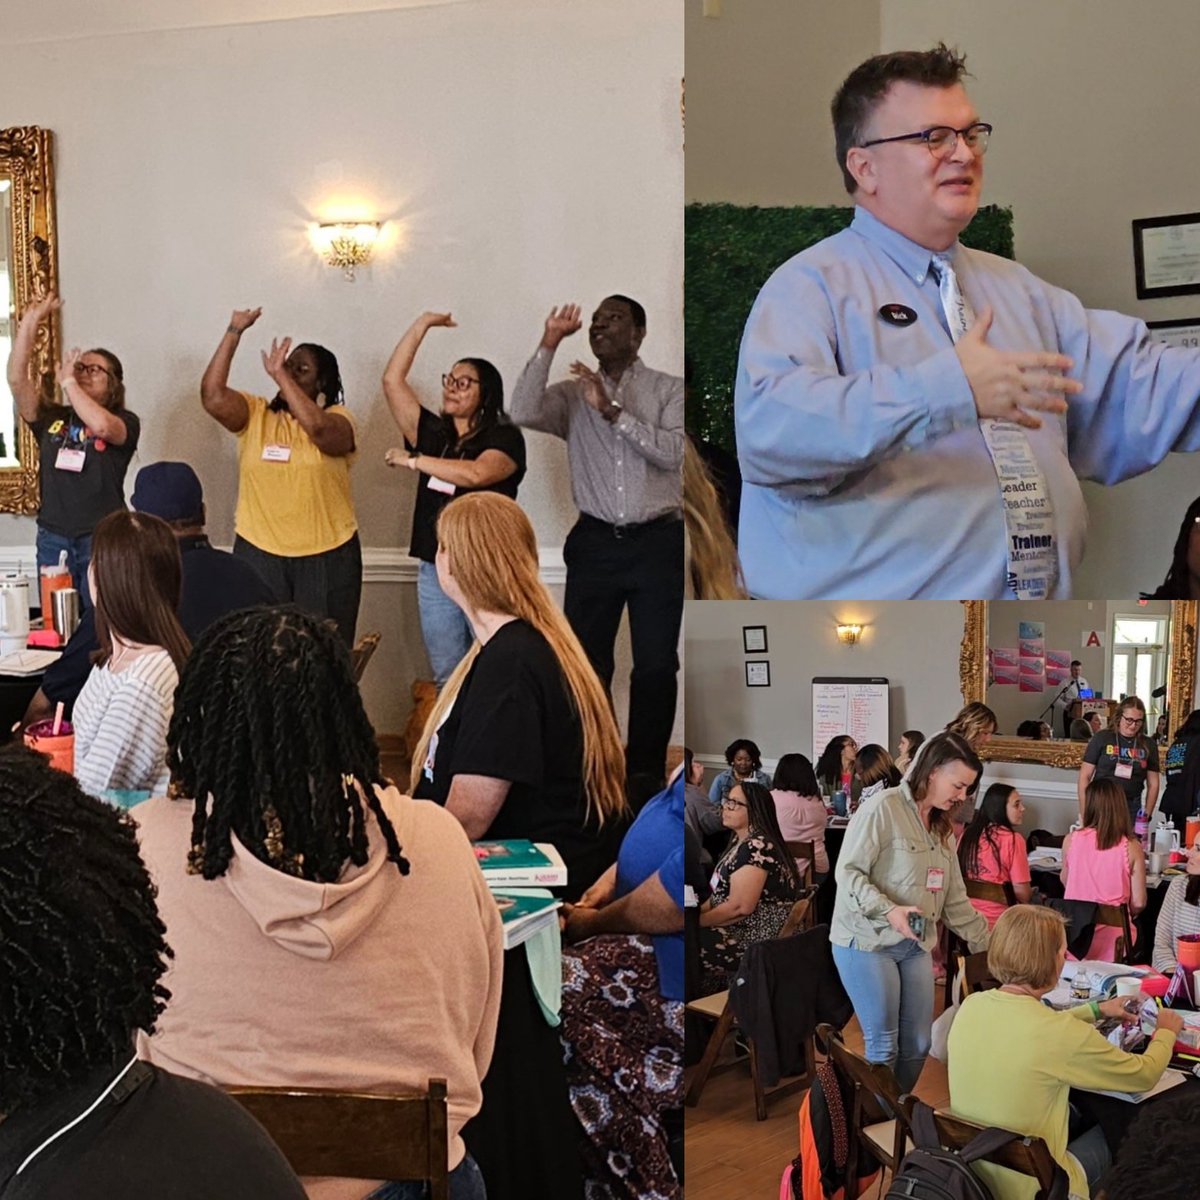 Today, Kagan Trainer Dr Rick used team-building and cooperative learning structures to turn this room full of strangers into moving-grooving teammates who were fully invested in each other's success! @rickatkagan